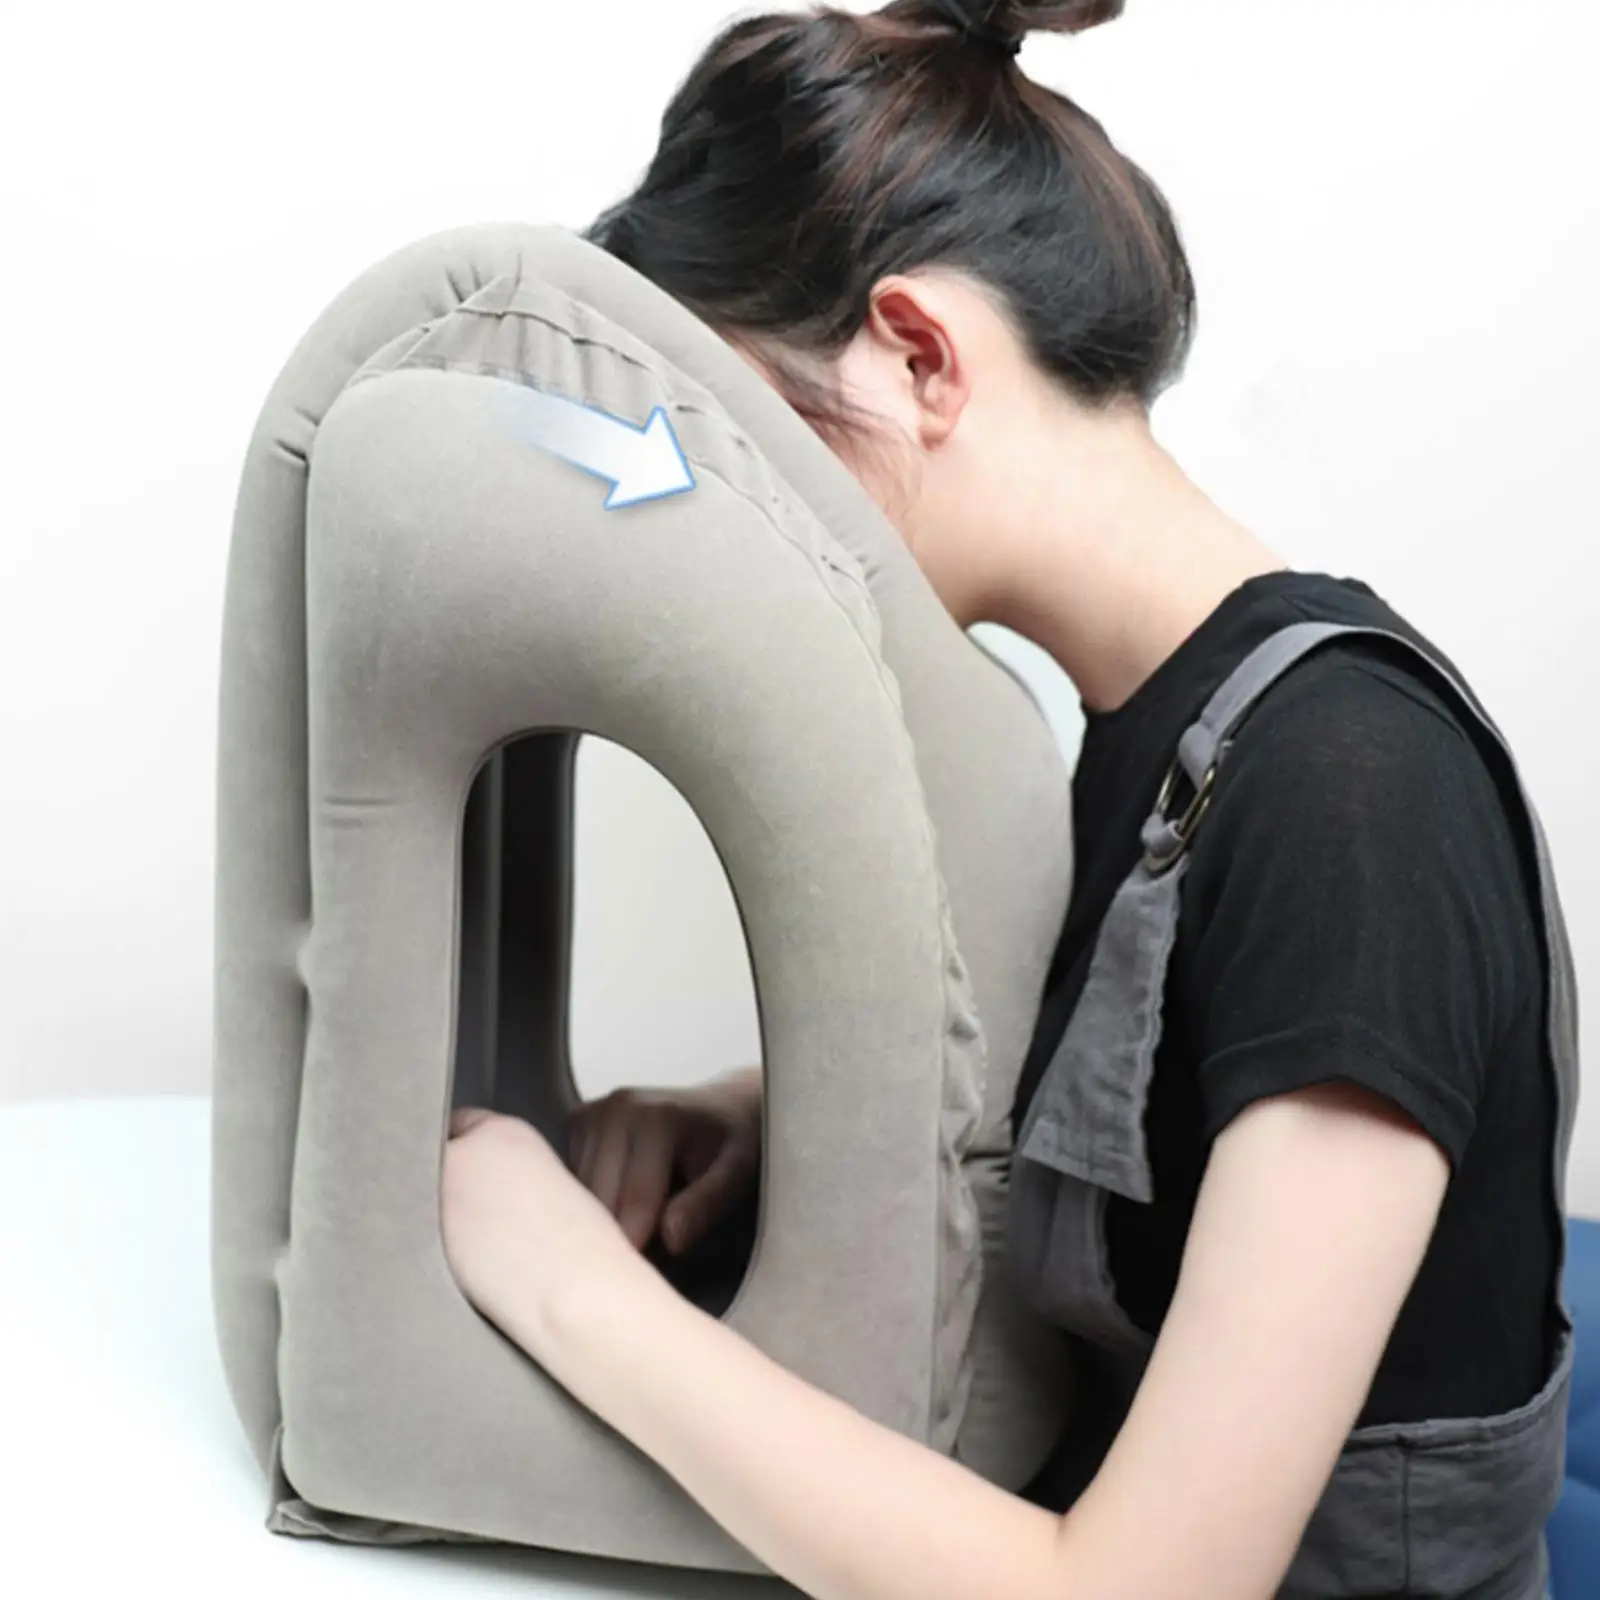 

Upgraded Inflatable Air Cushion Travel Pillow Headrest Chin Support Cushions For Airplane Plane Car Office Rest Neck Nap Pi N2c8